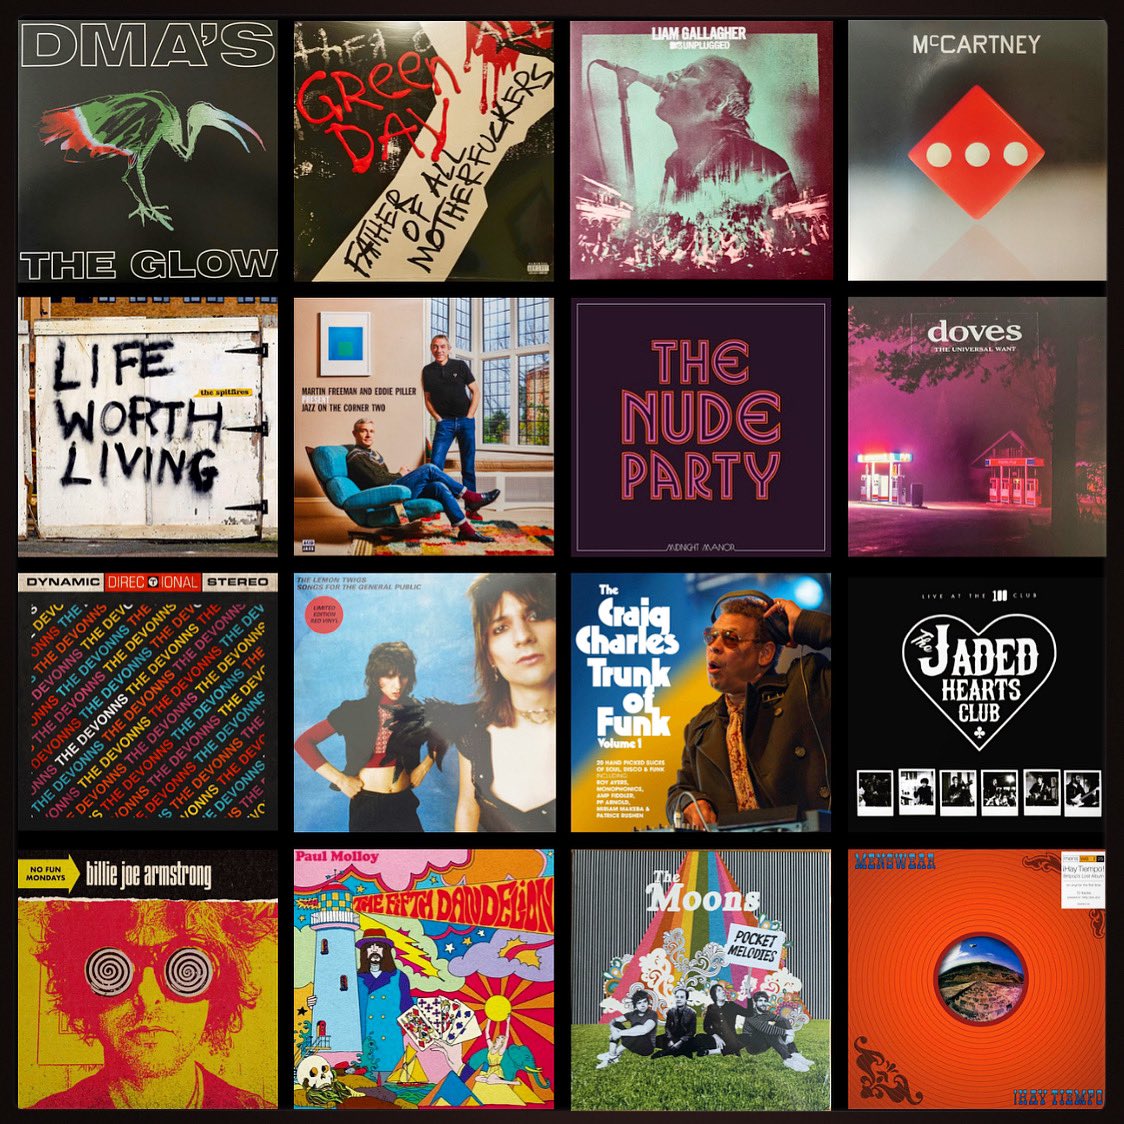 Here are my top 16 new releases of 2020, that I bought on vinyl. In a year that we were all missing live music, these releases helped!  #DMAs #liamgallagher #paulmccartney #thespitfires #thenudeparty #doves #thelemontwigs #thejadedheartsclub #paulmolloy #themoons #menswear